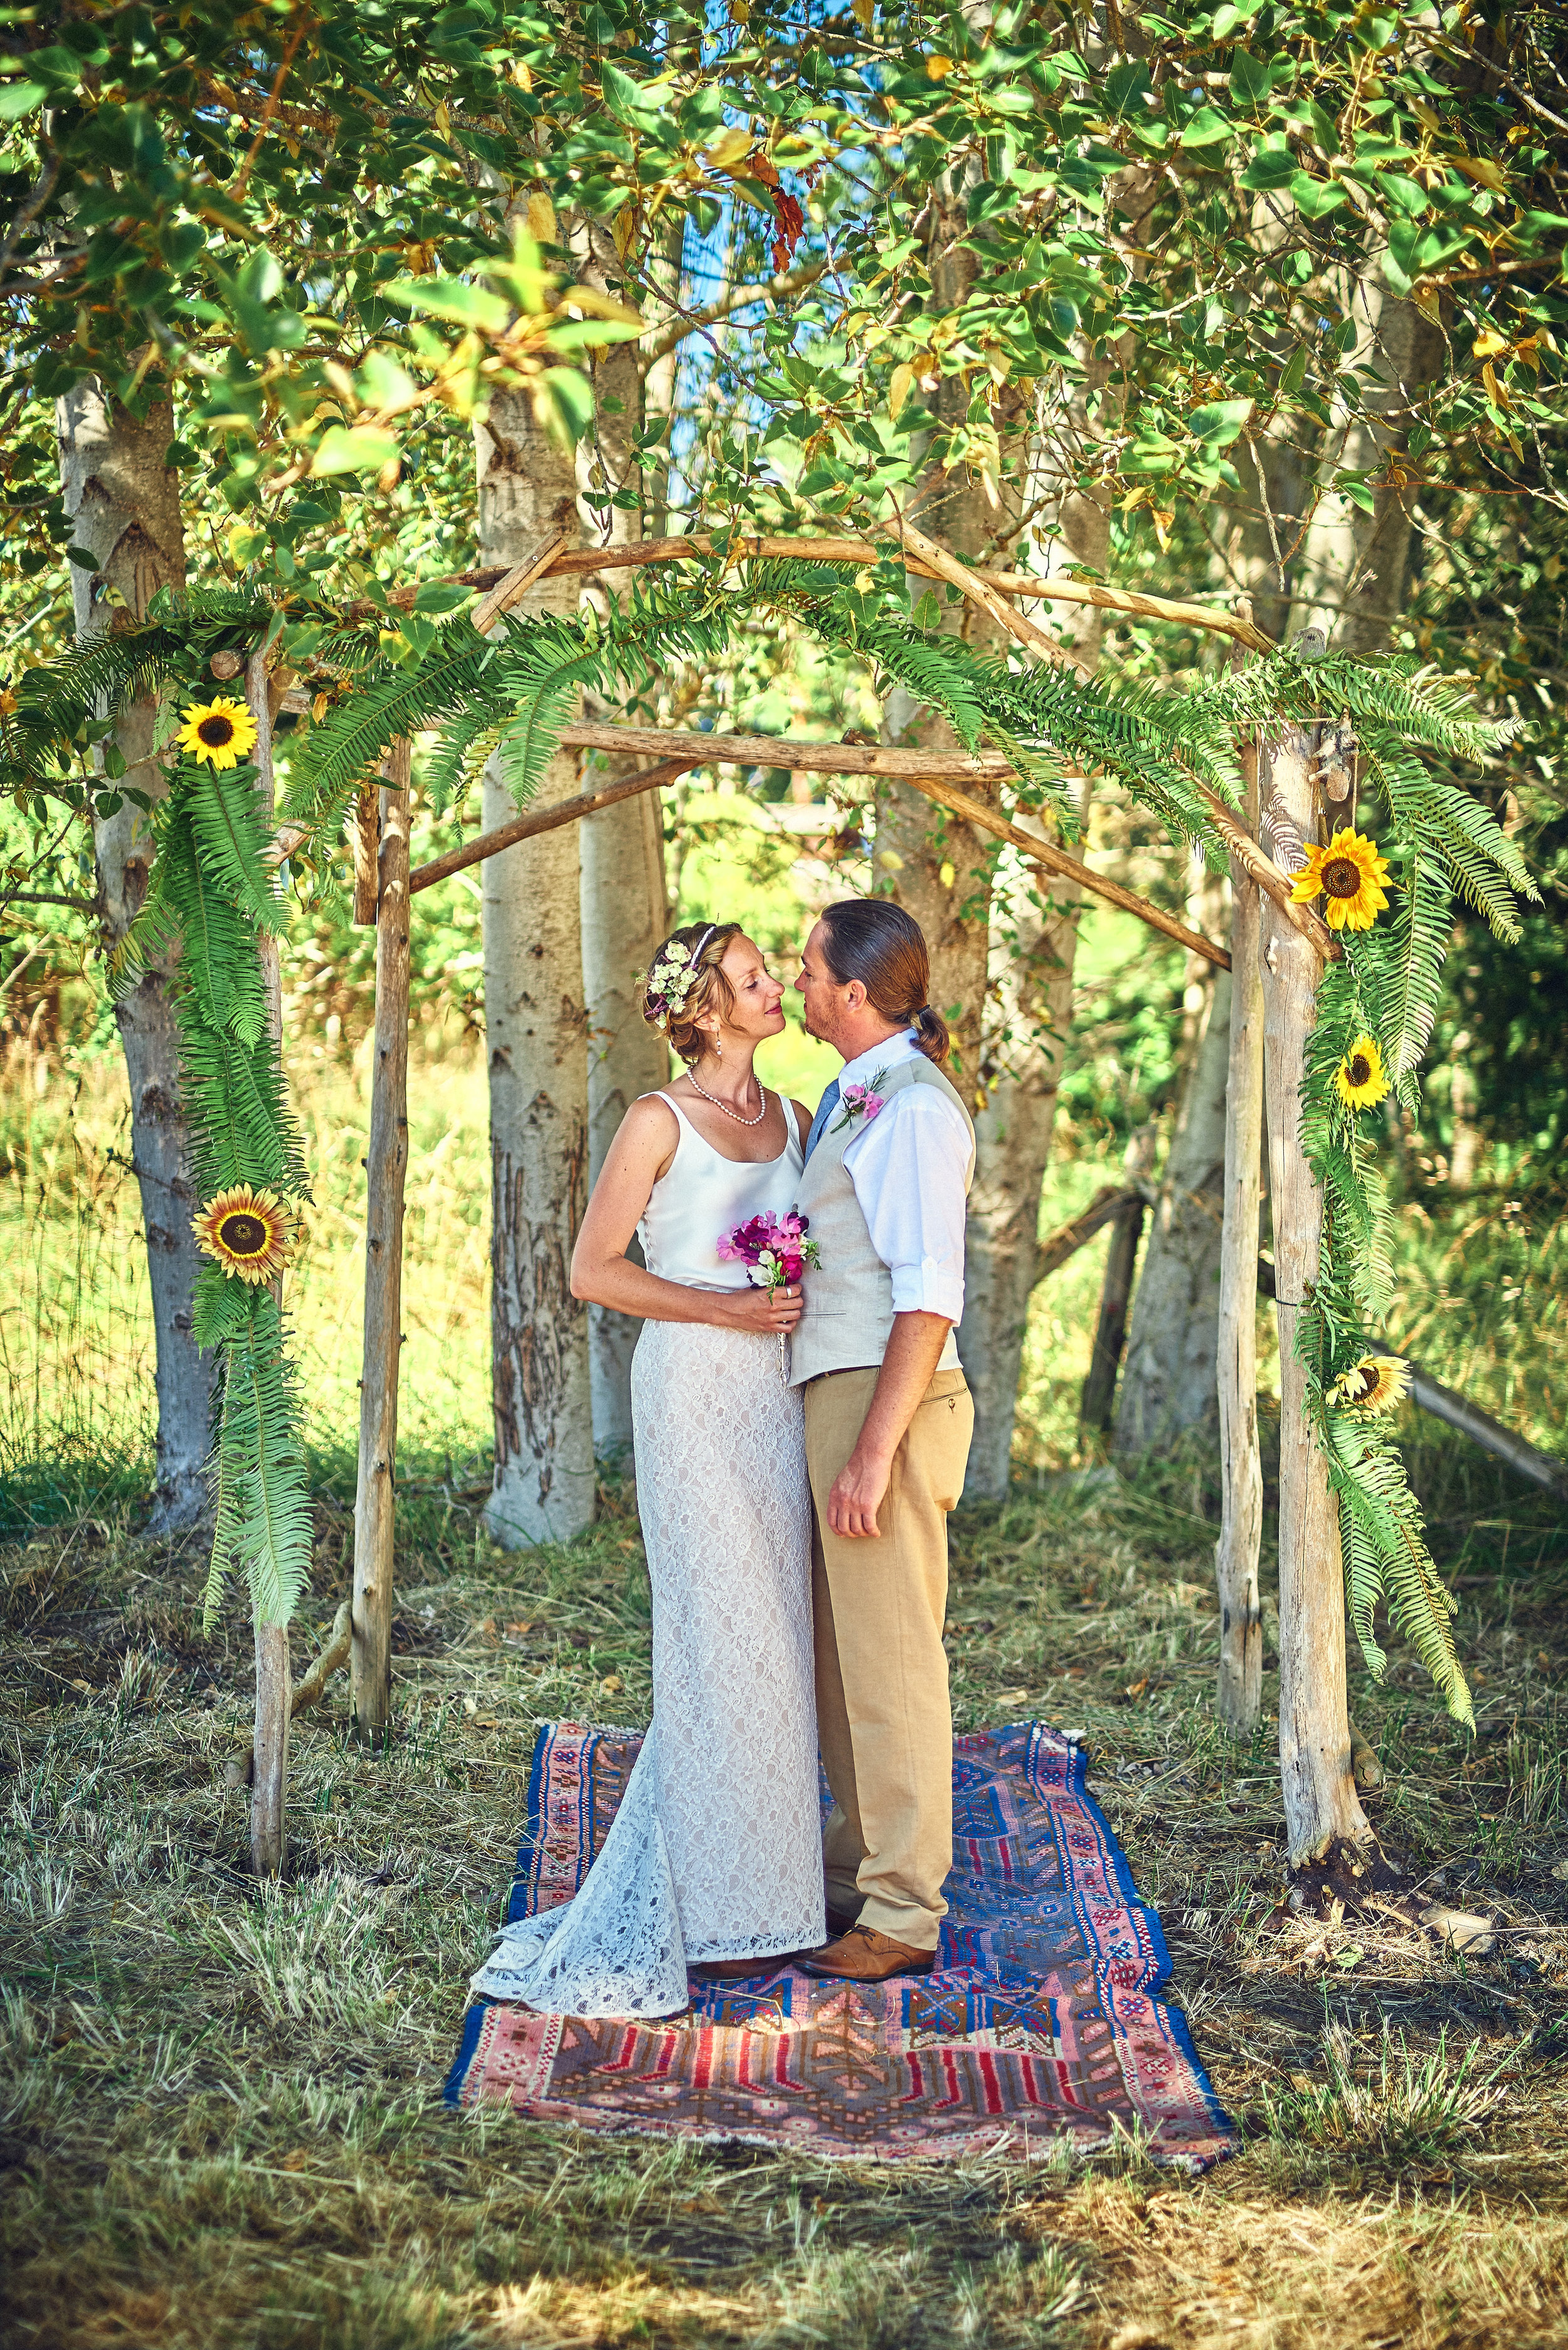 plum nelli farm wedding arbor with ferns and sunflowers and woven rug.jpg